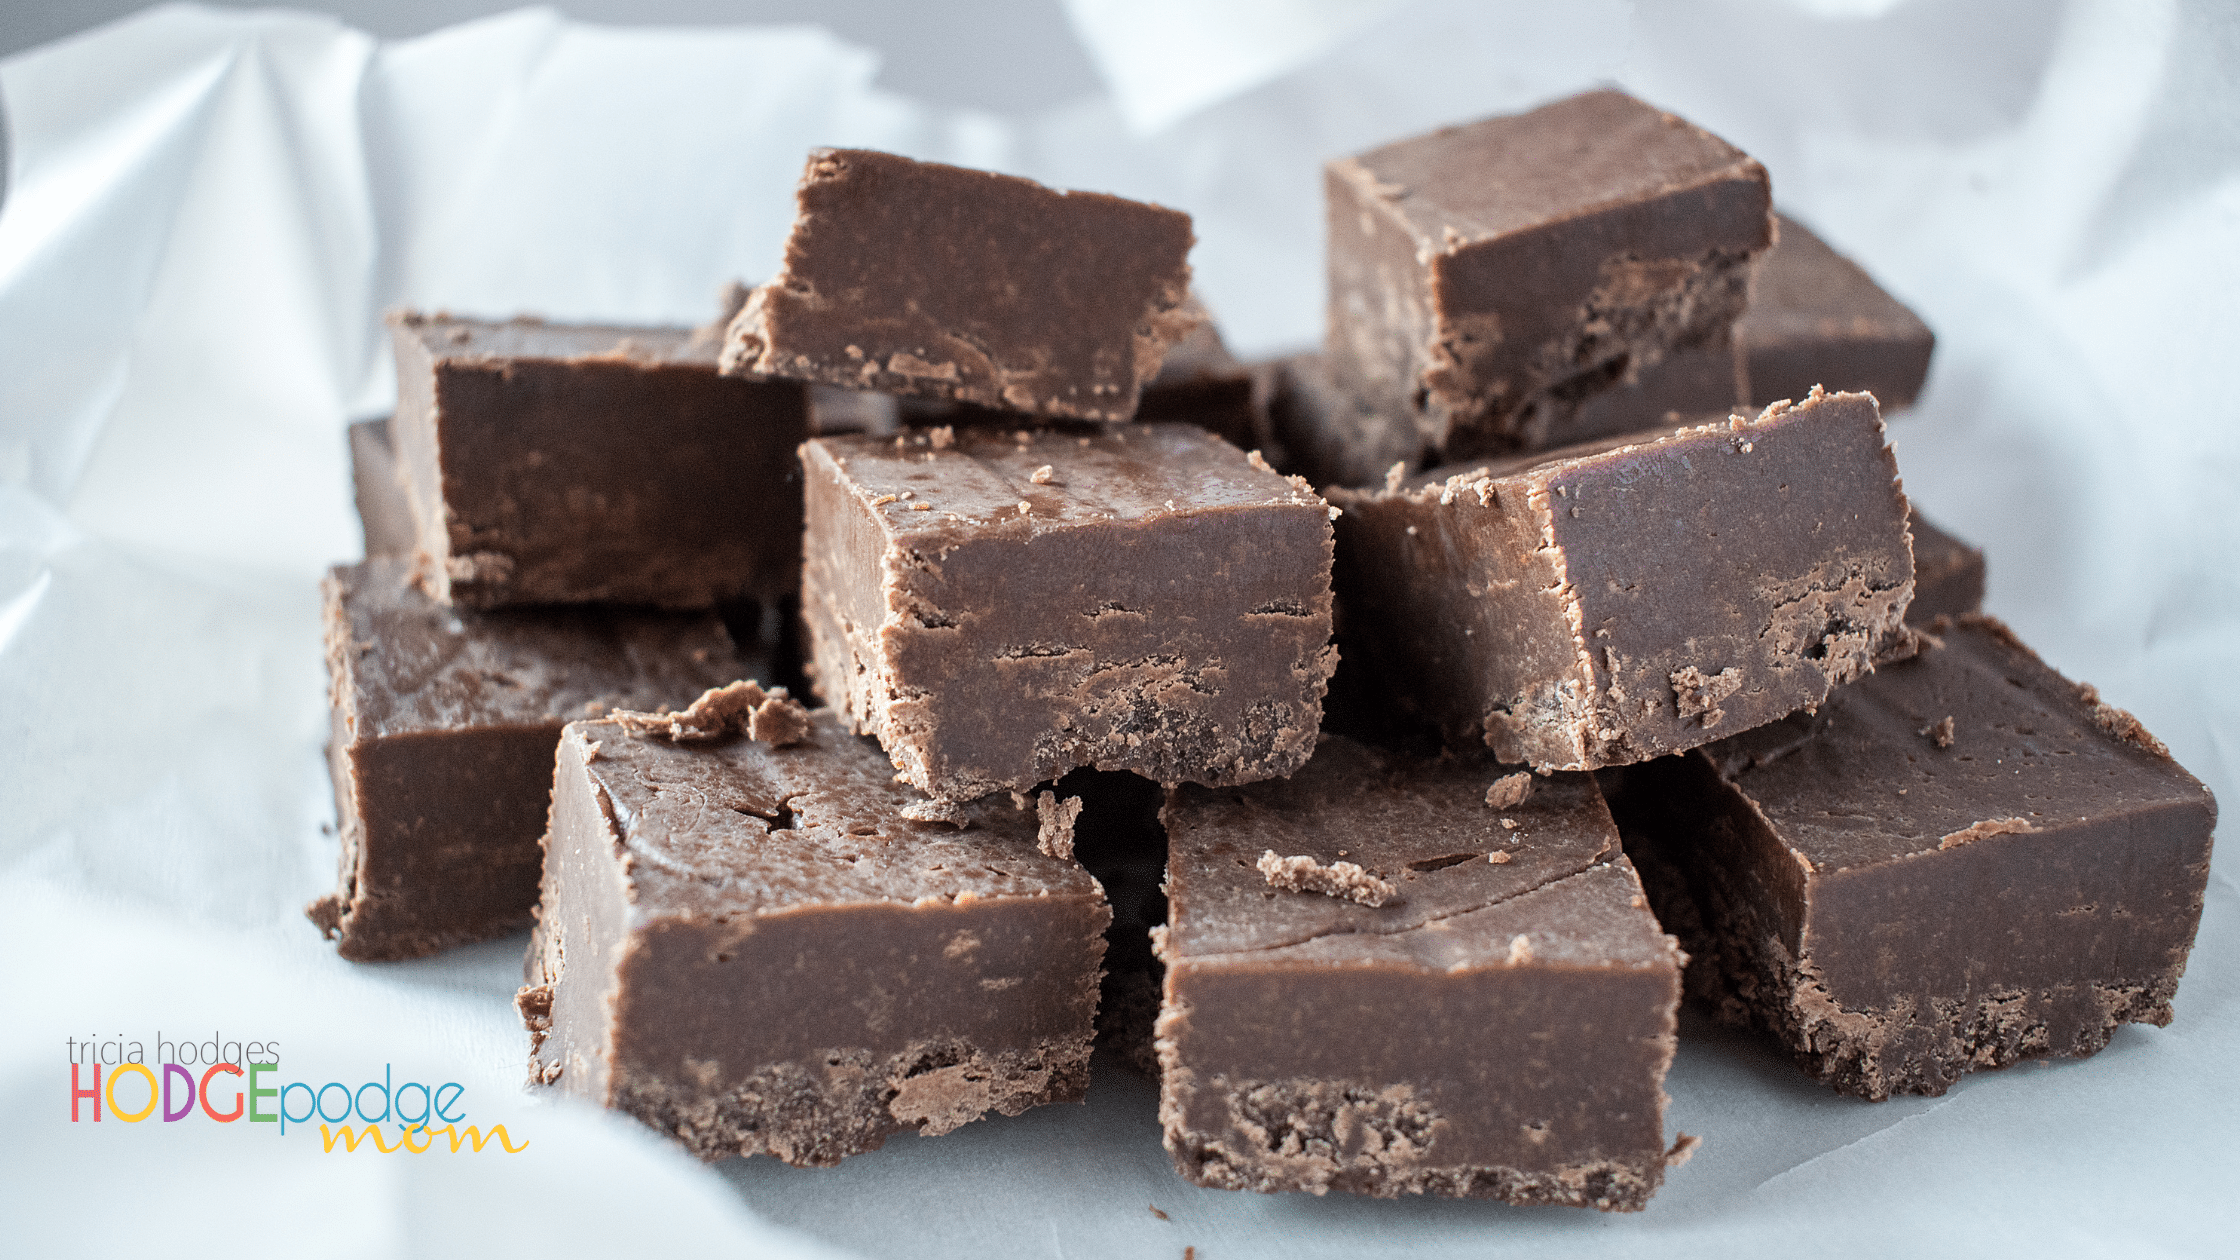 Enjoy this easy microwave fudge recipe! There are only three ingredients and you likely have those ingredients on hand in your pantry.